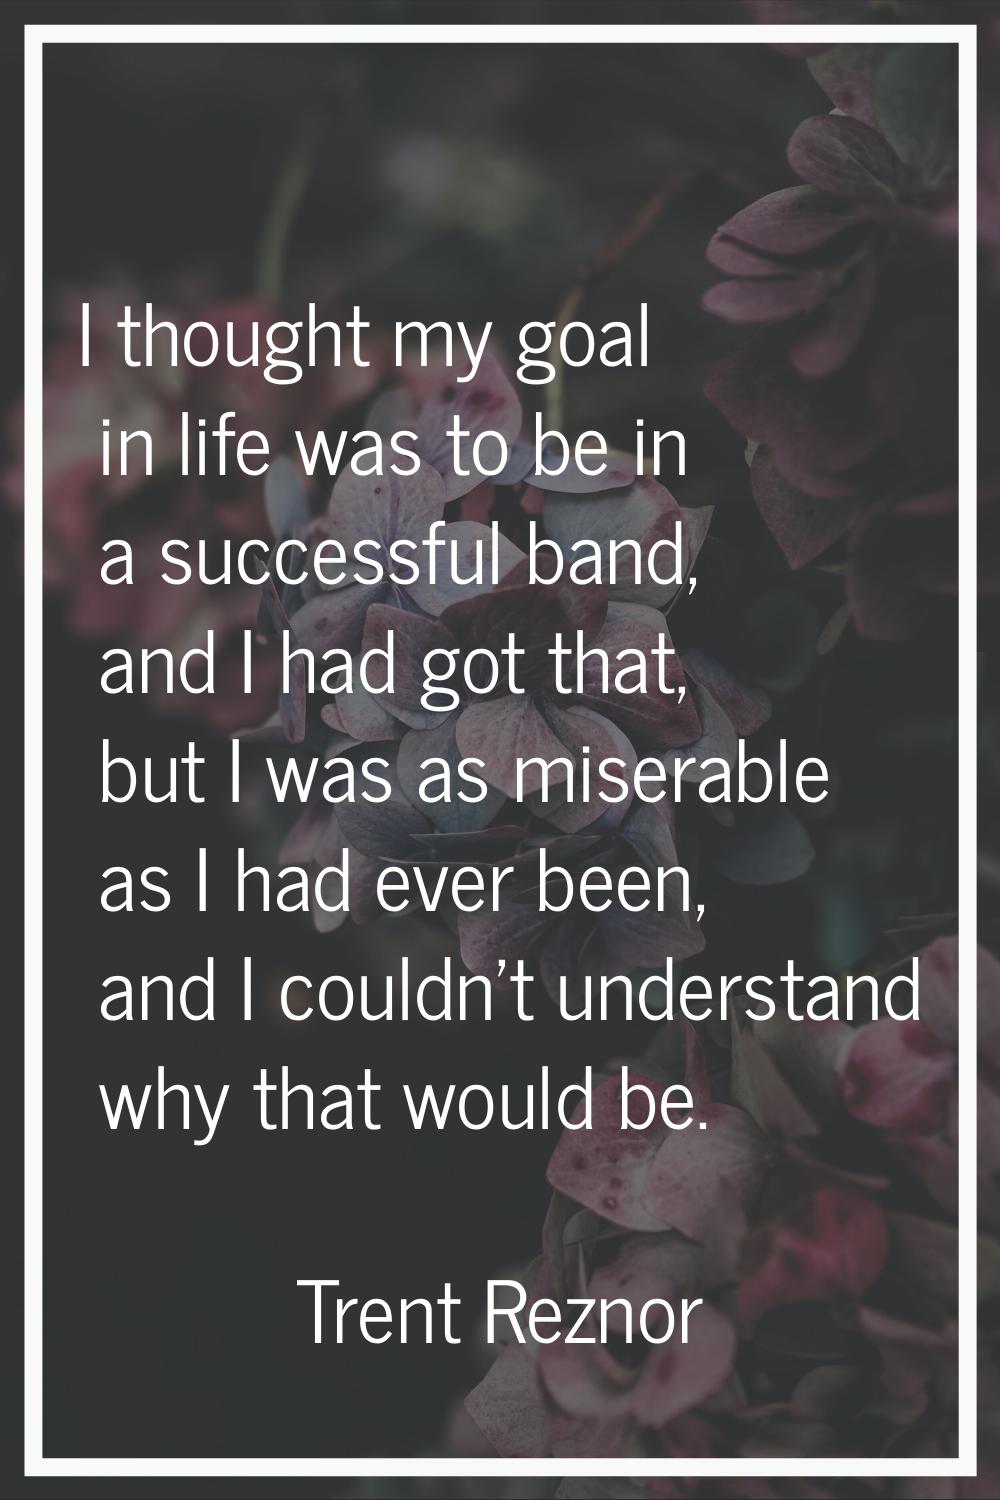 I thought my goal in life was to be in a successful band, and I had got that, but I was as miserabl